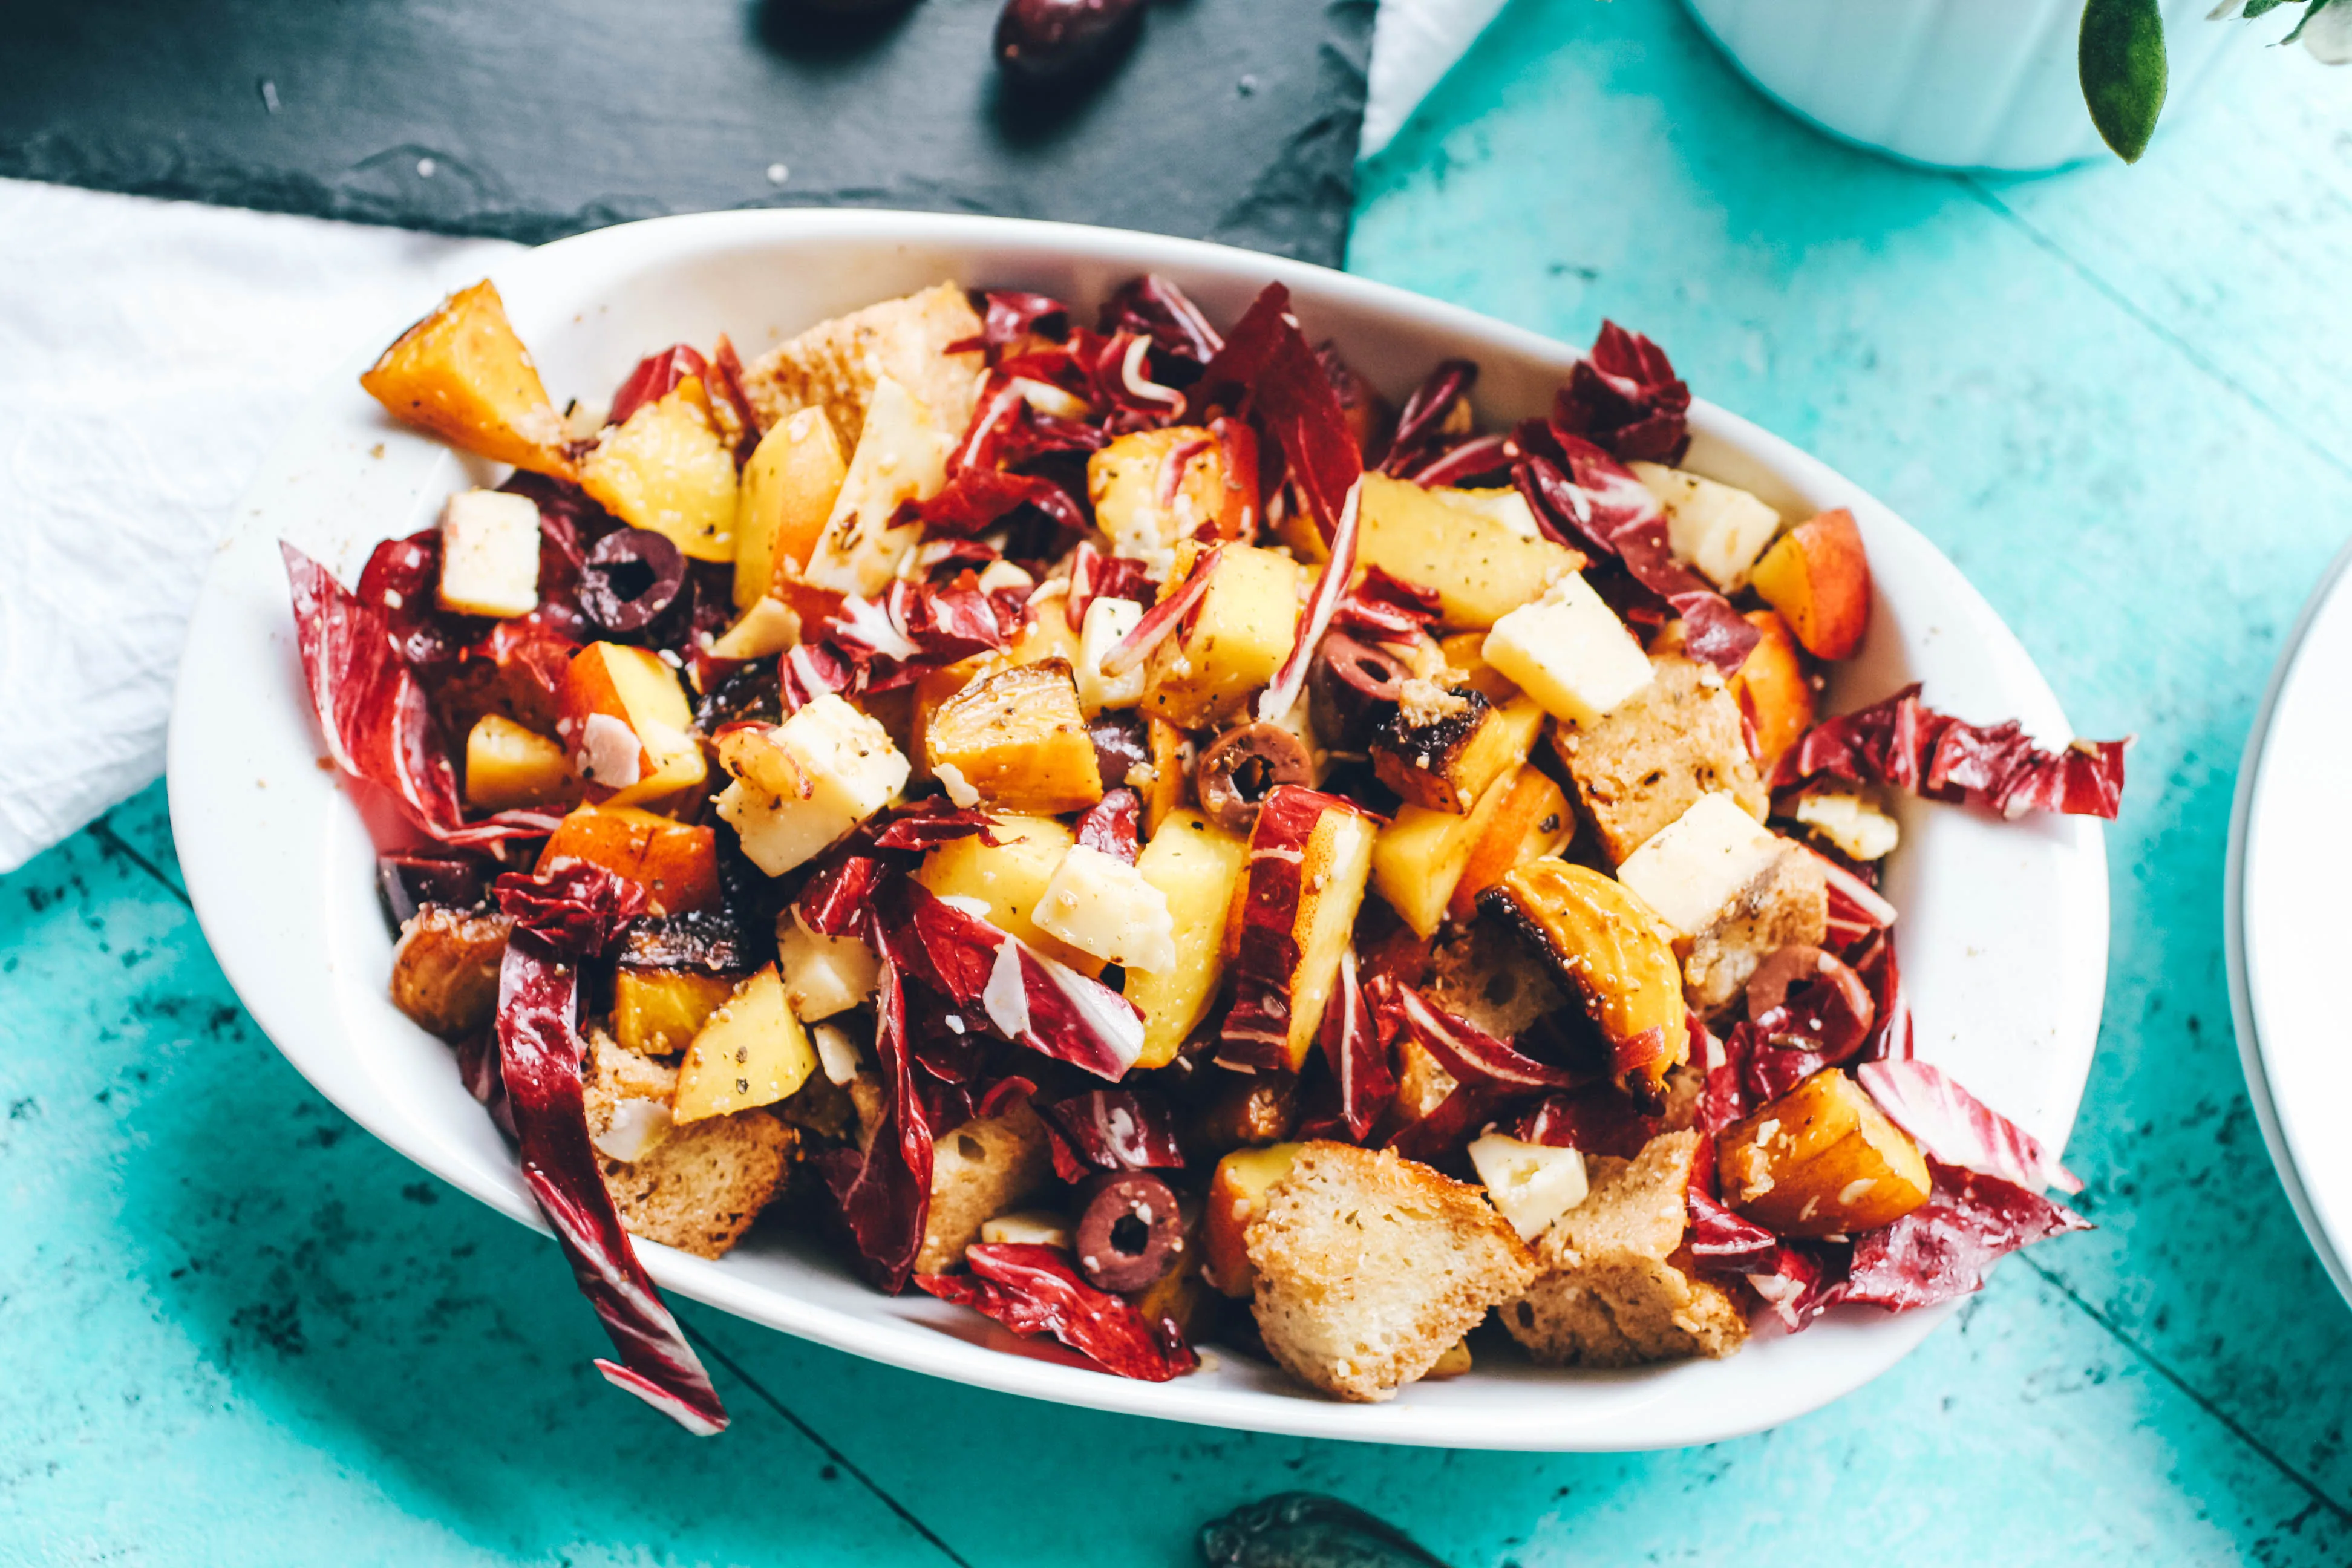 Roasted Beet, Peach & Radicchio Panzanella Salad is a salad that's filling and big on flavor. Dig into Roasted Beet, Peach & Radicchio Panzanella Salad for your next meal.